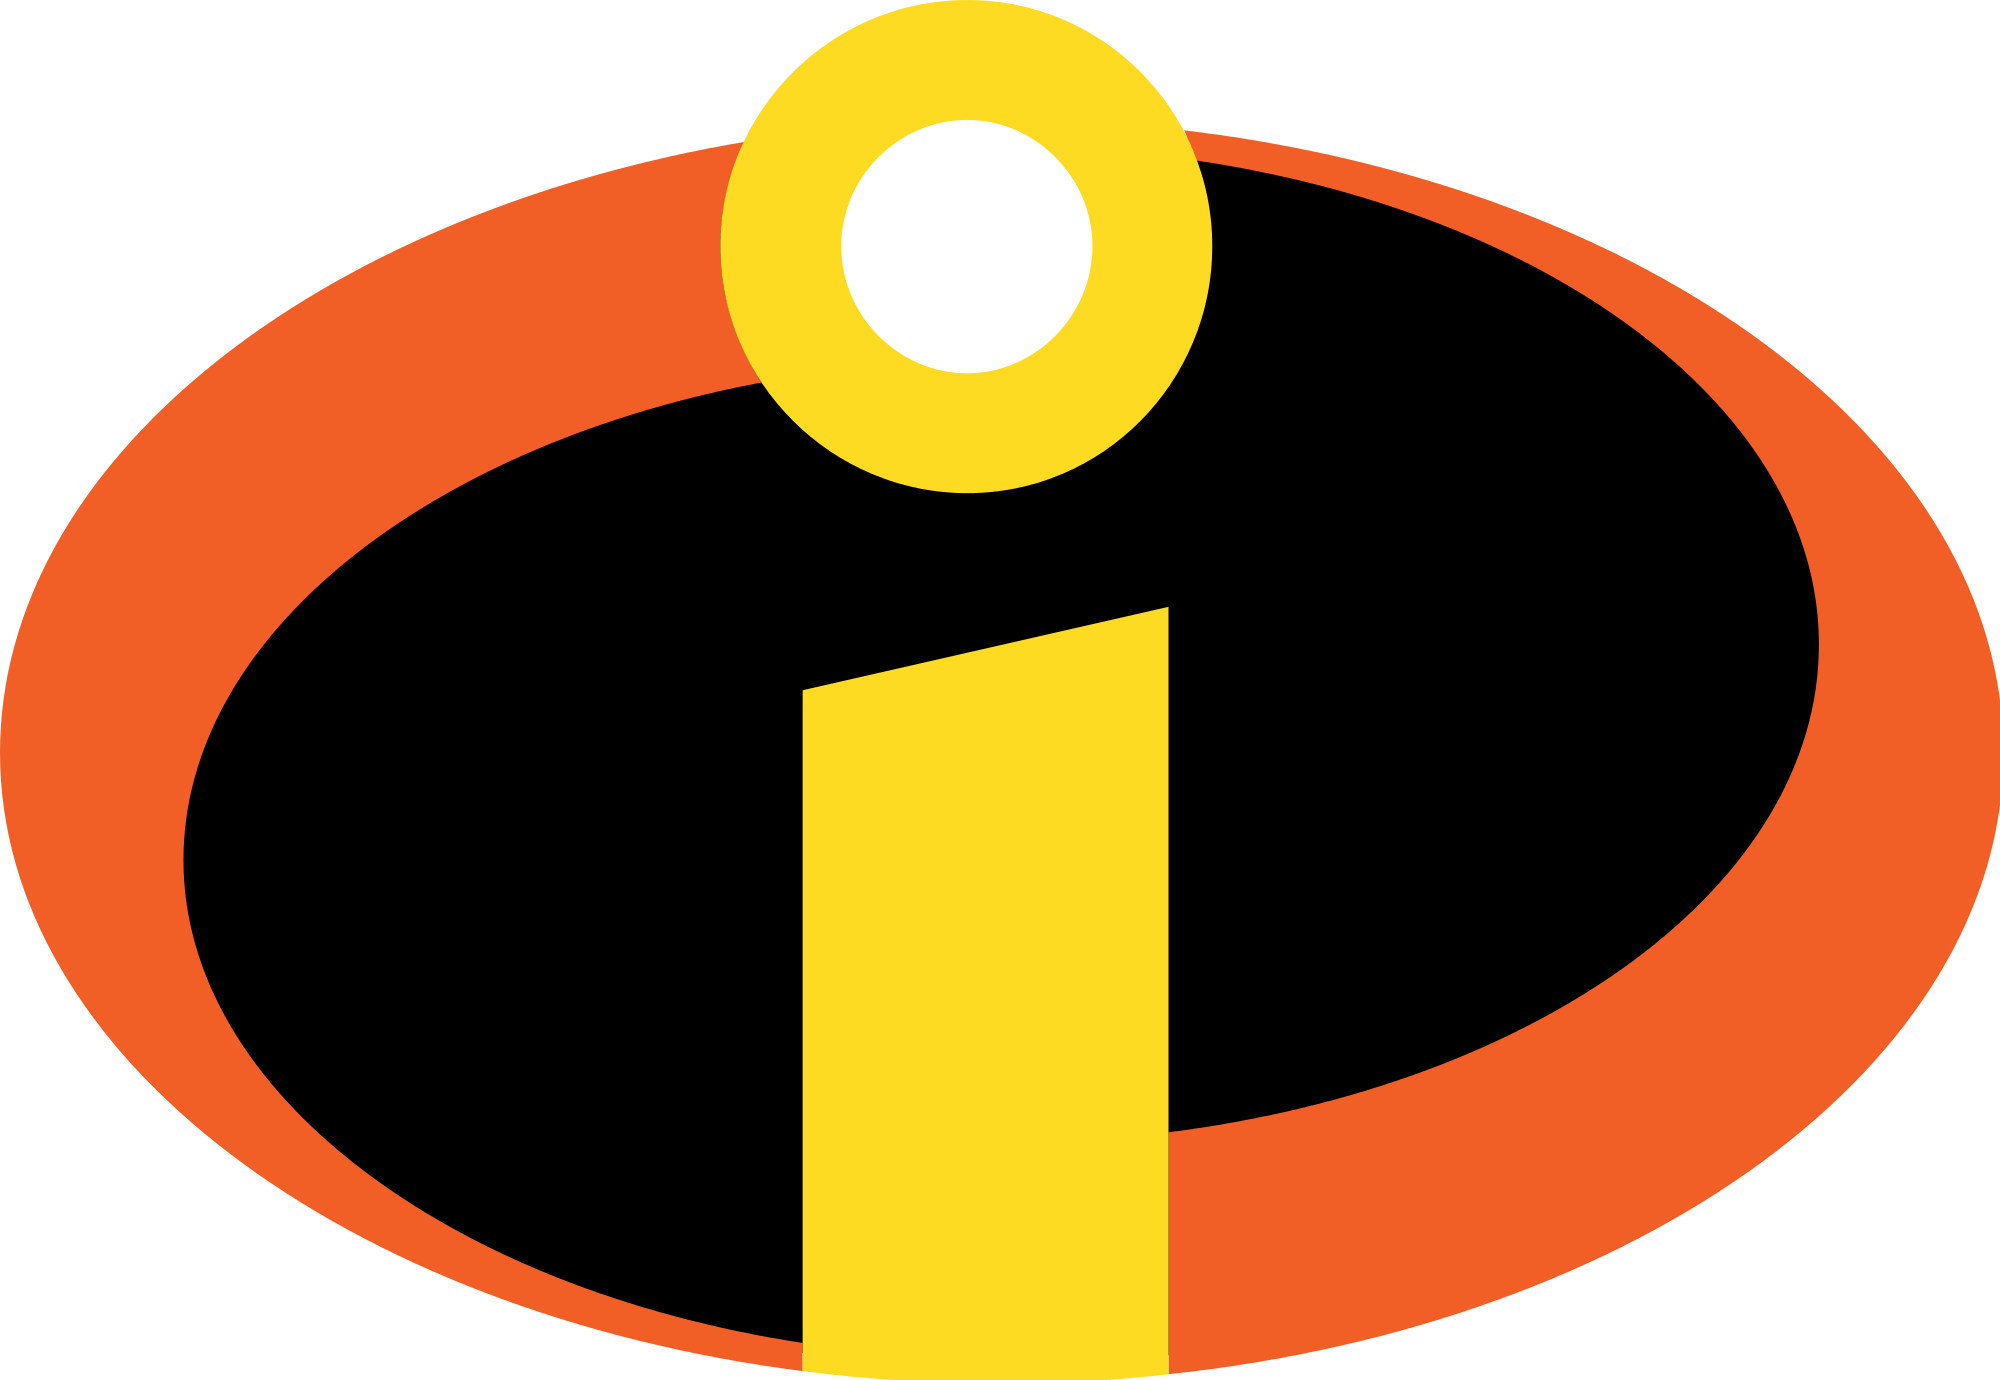 Incredible the Pixar Logo - File:Symbol from The Incredibles logo.svg - Wikimedia Commons